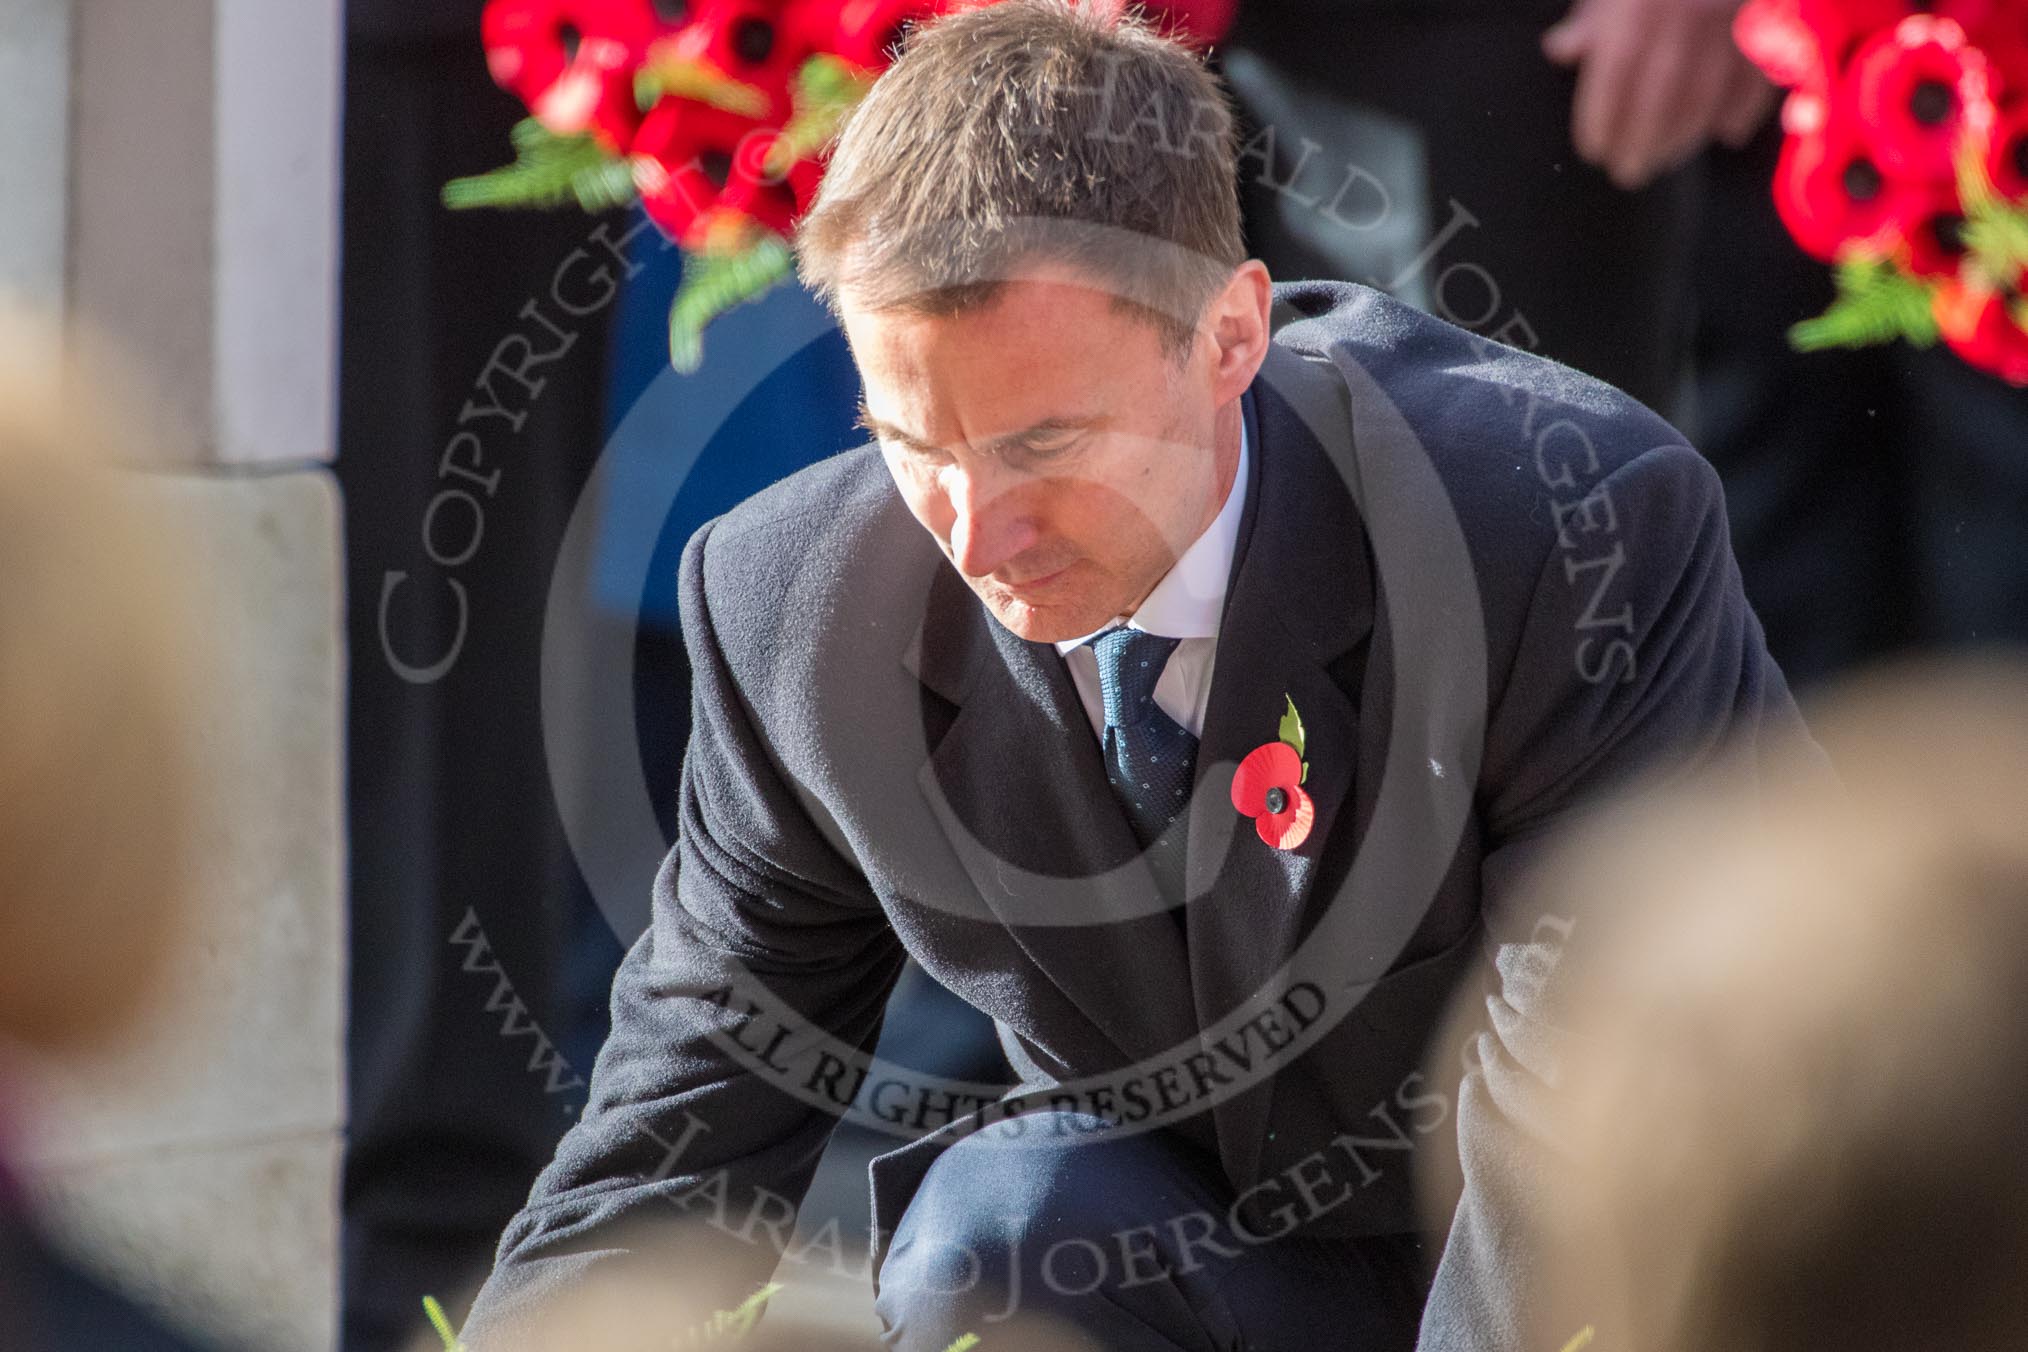 The Rt Hon Jeremy Hunt MP, Secretary of State for Foreign and Commonwealth Affairs, on behalf of the United Kingdom Overseas Territories laying his wreath during the Remembrance Sunday Cenotaph Ceremony 2018 at Horse Guards Parade, Westminster, London, 11 November 2018, 11:11.